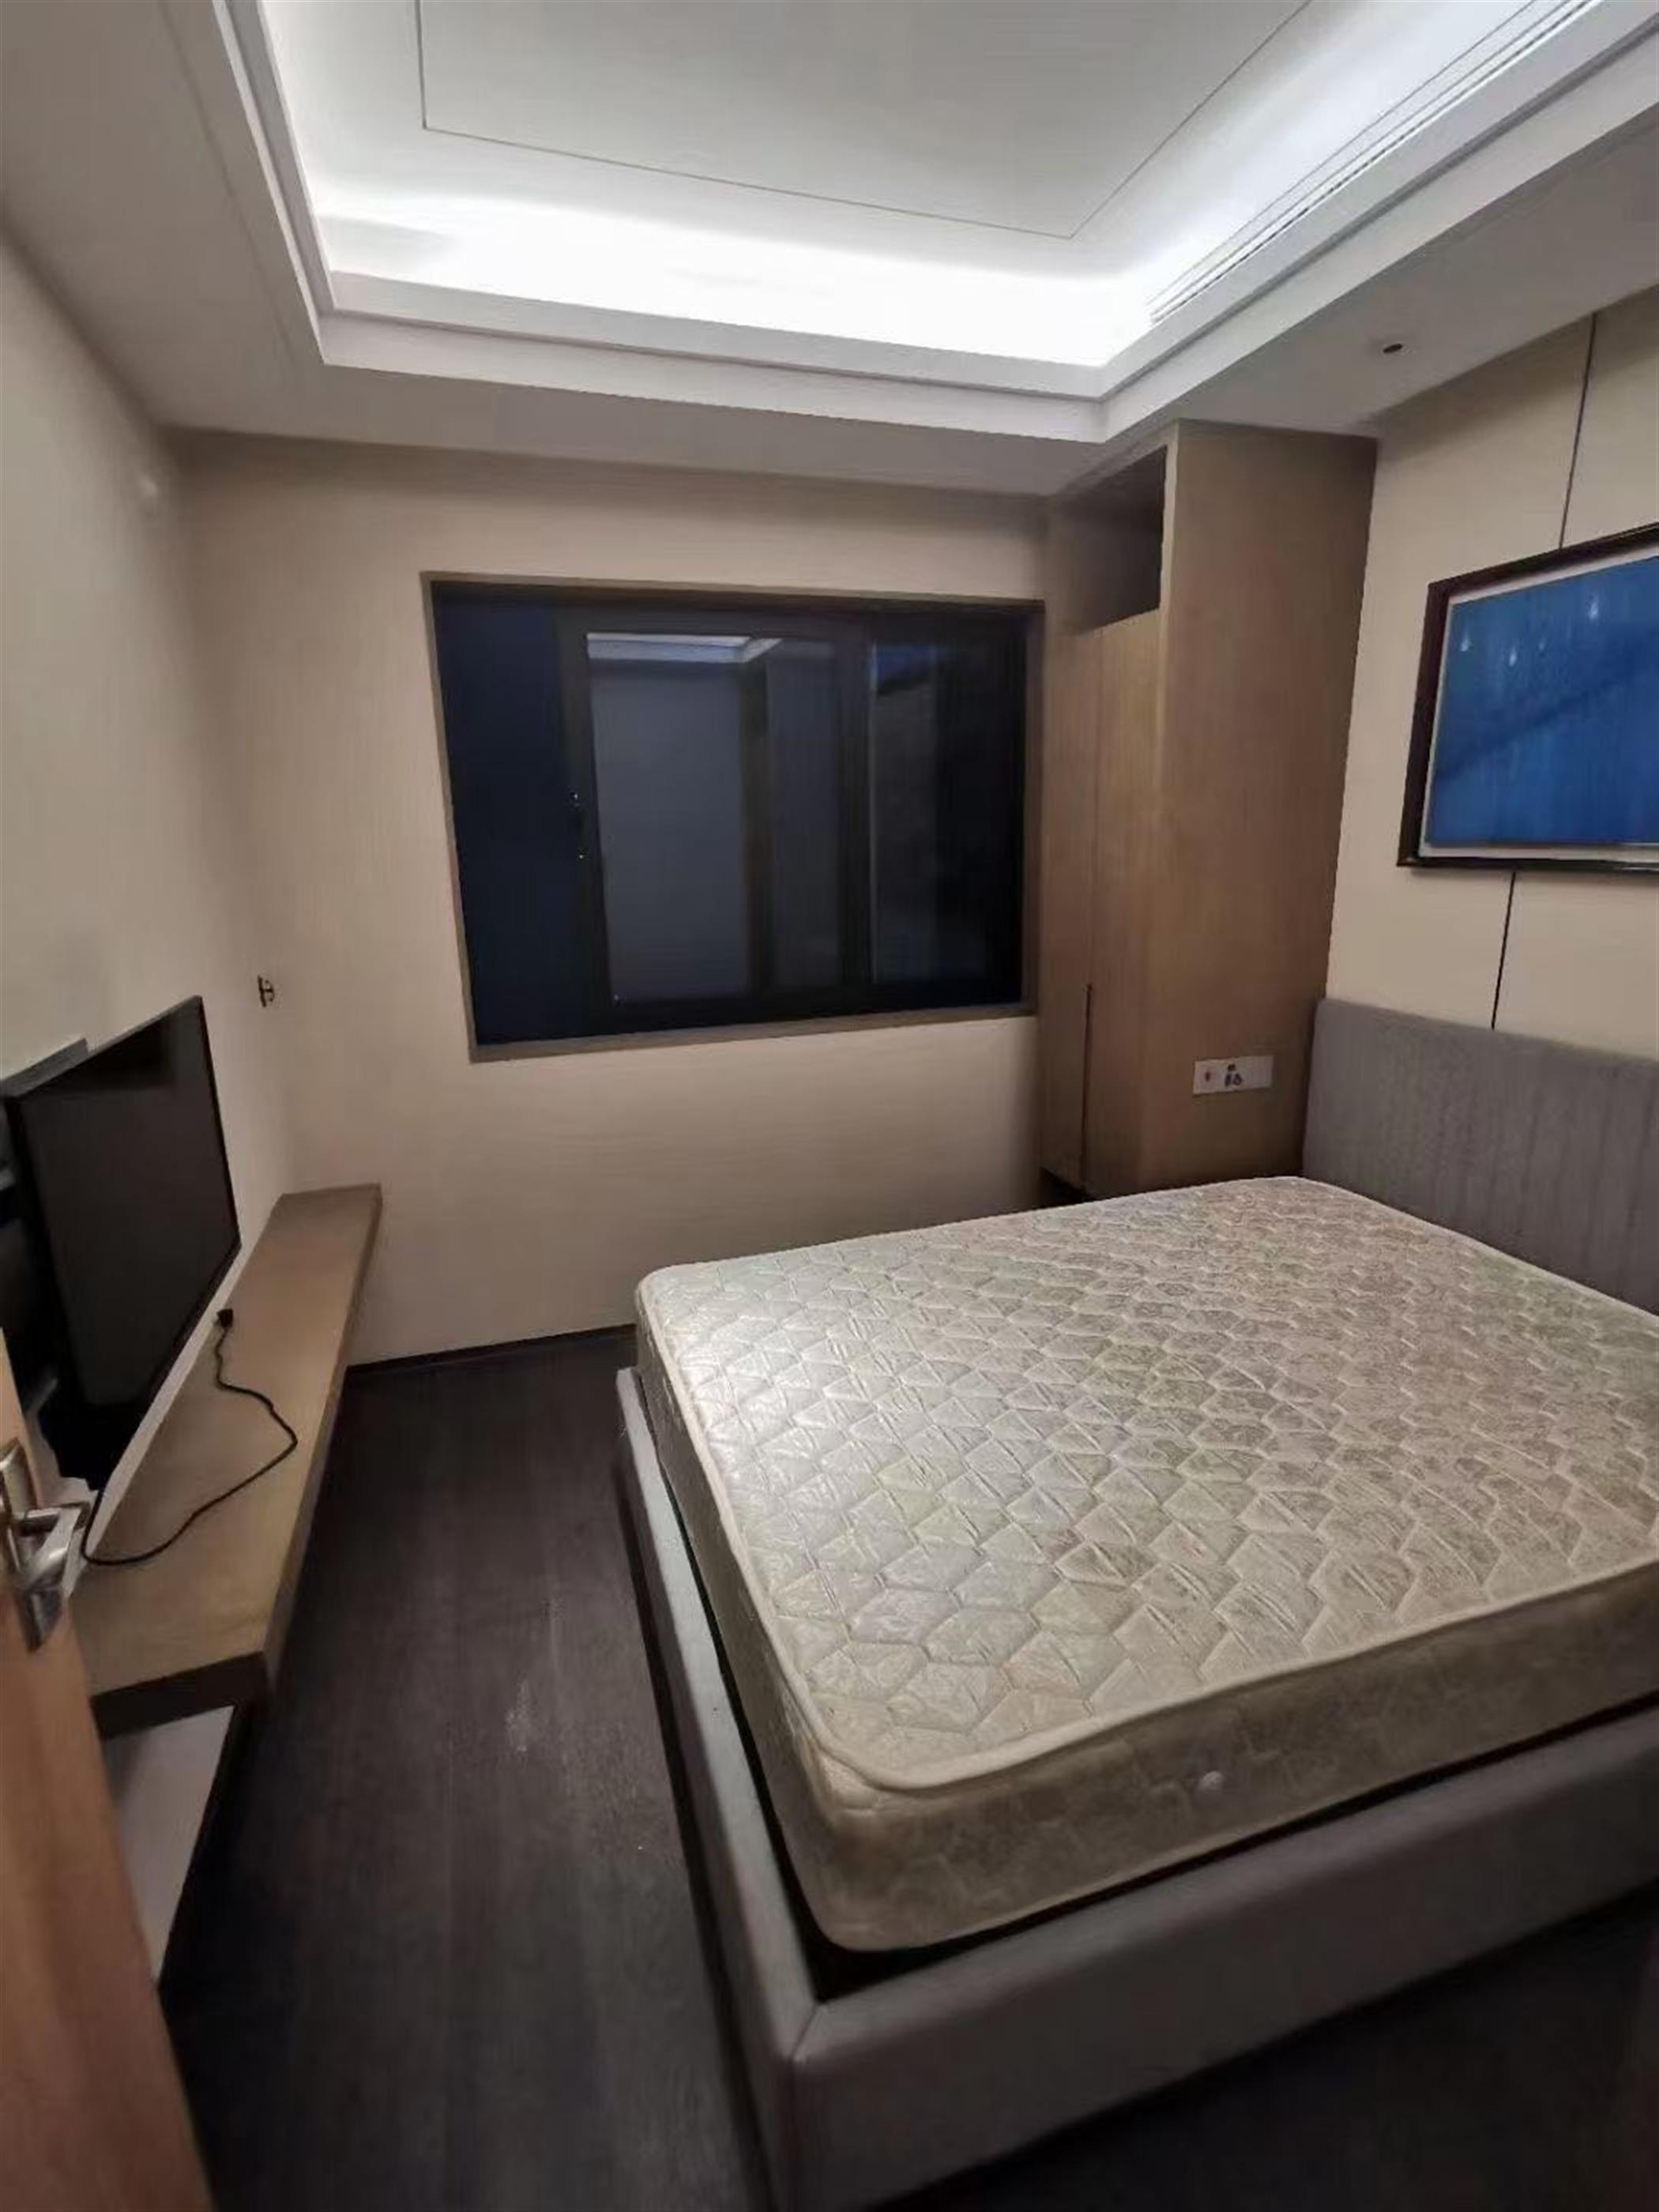 new bedroom New Spacious Convenient Lux 3BR Gubei Apartment nr LN 2/15 for Rent in Shanghai